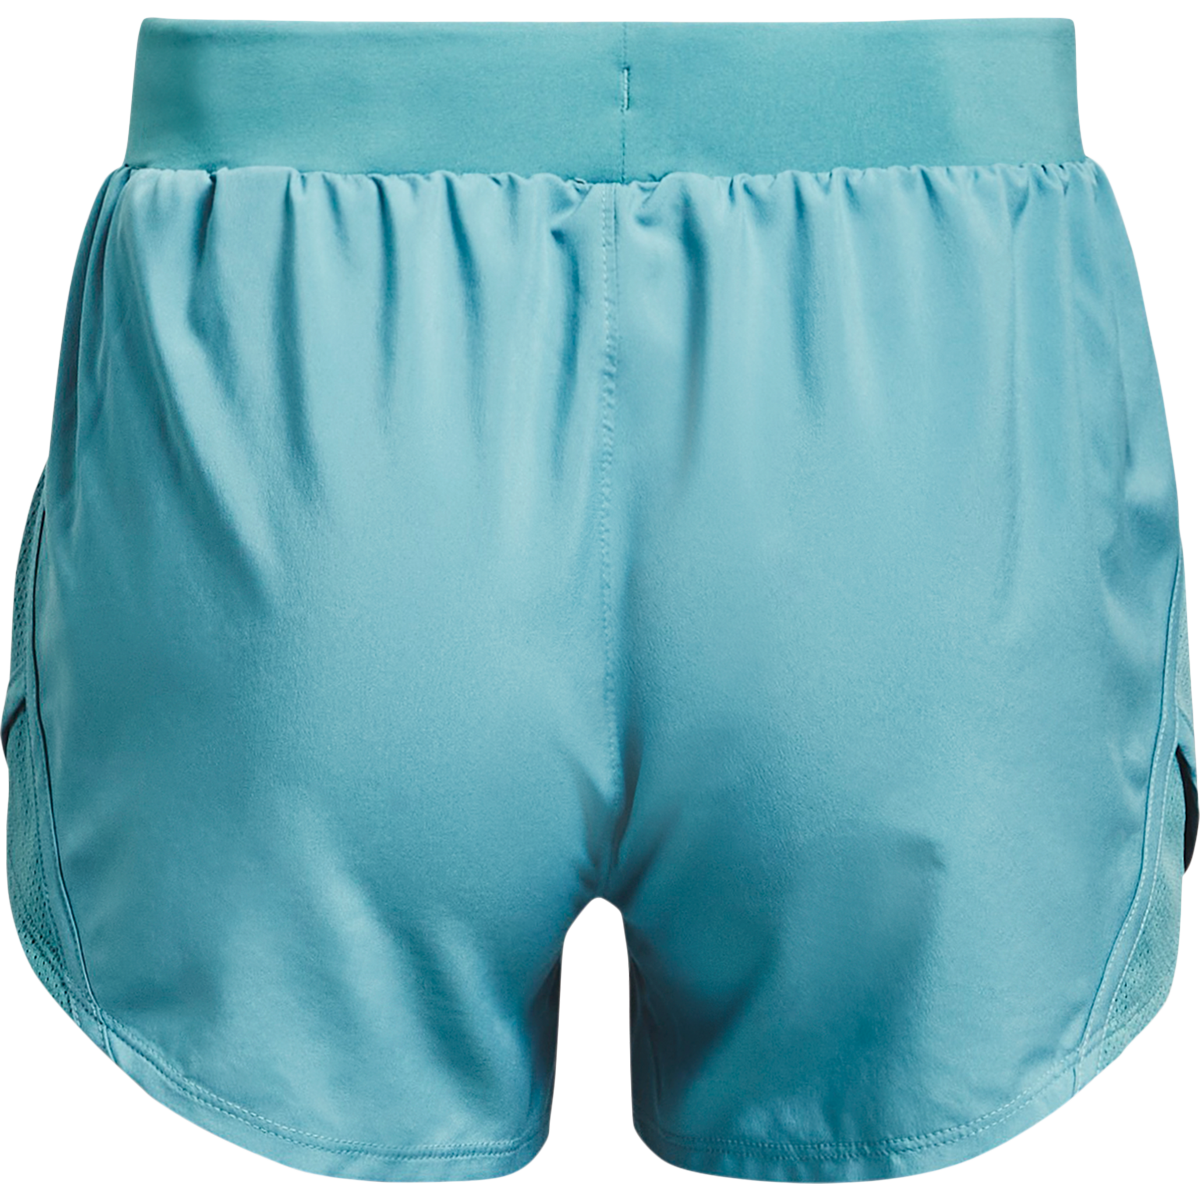 Girls' Fly By Shorts alternate view